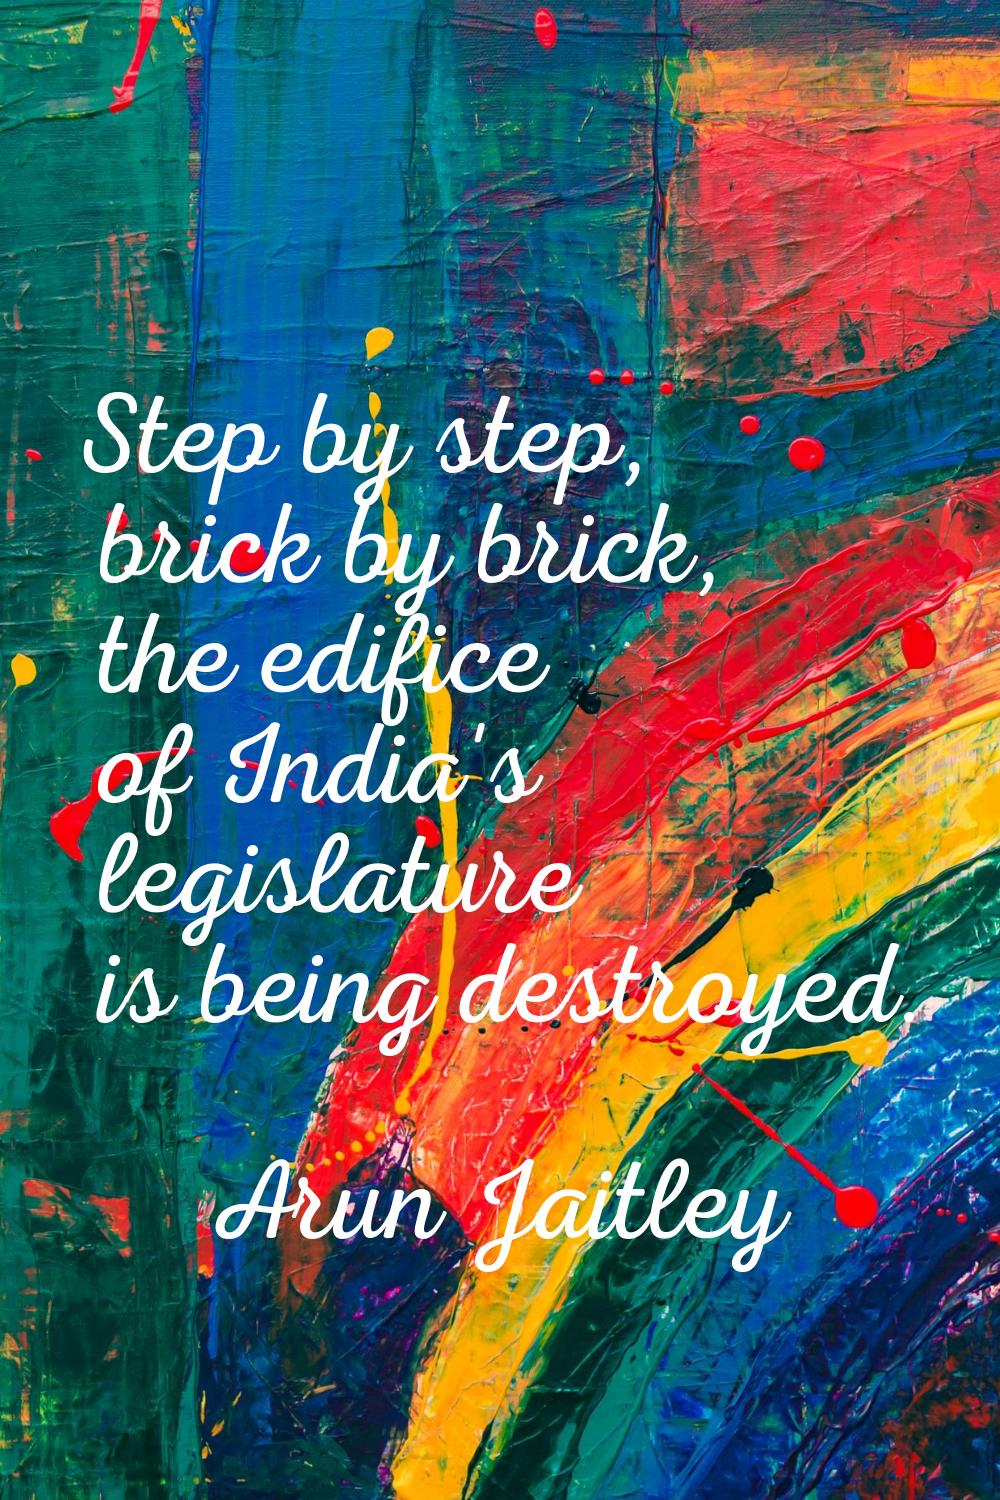 Step by step, brick by brick, the edifice of India's legislature is being destroyed.